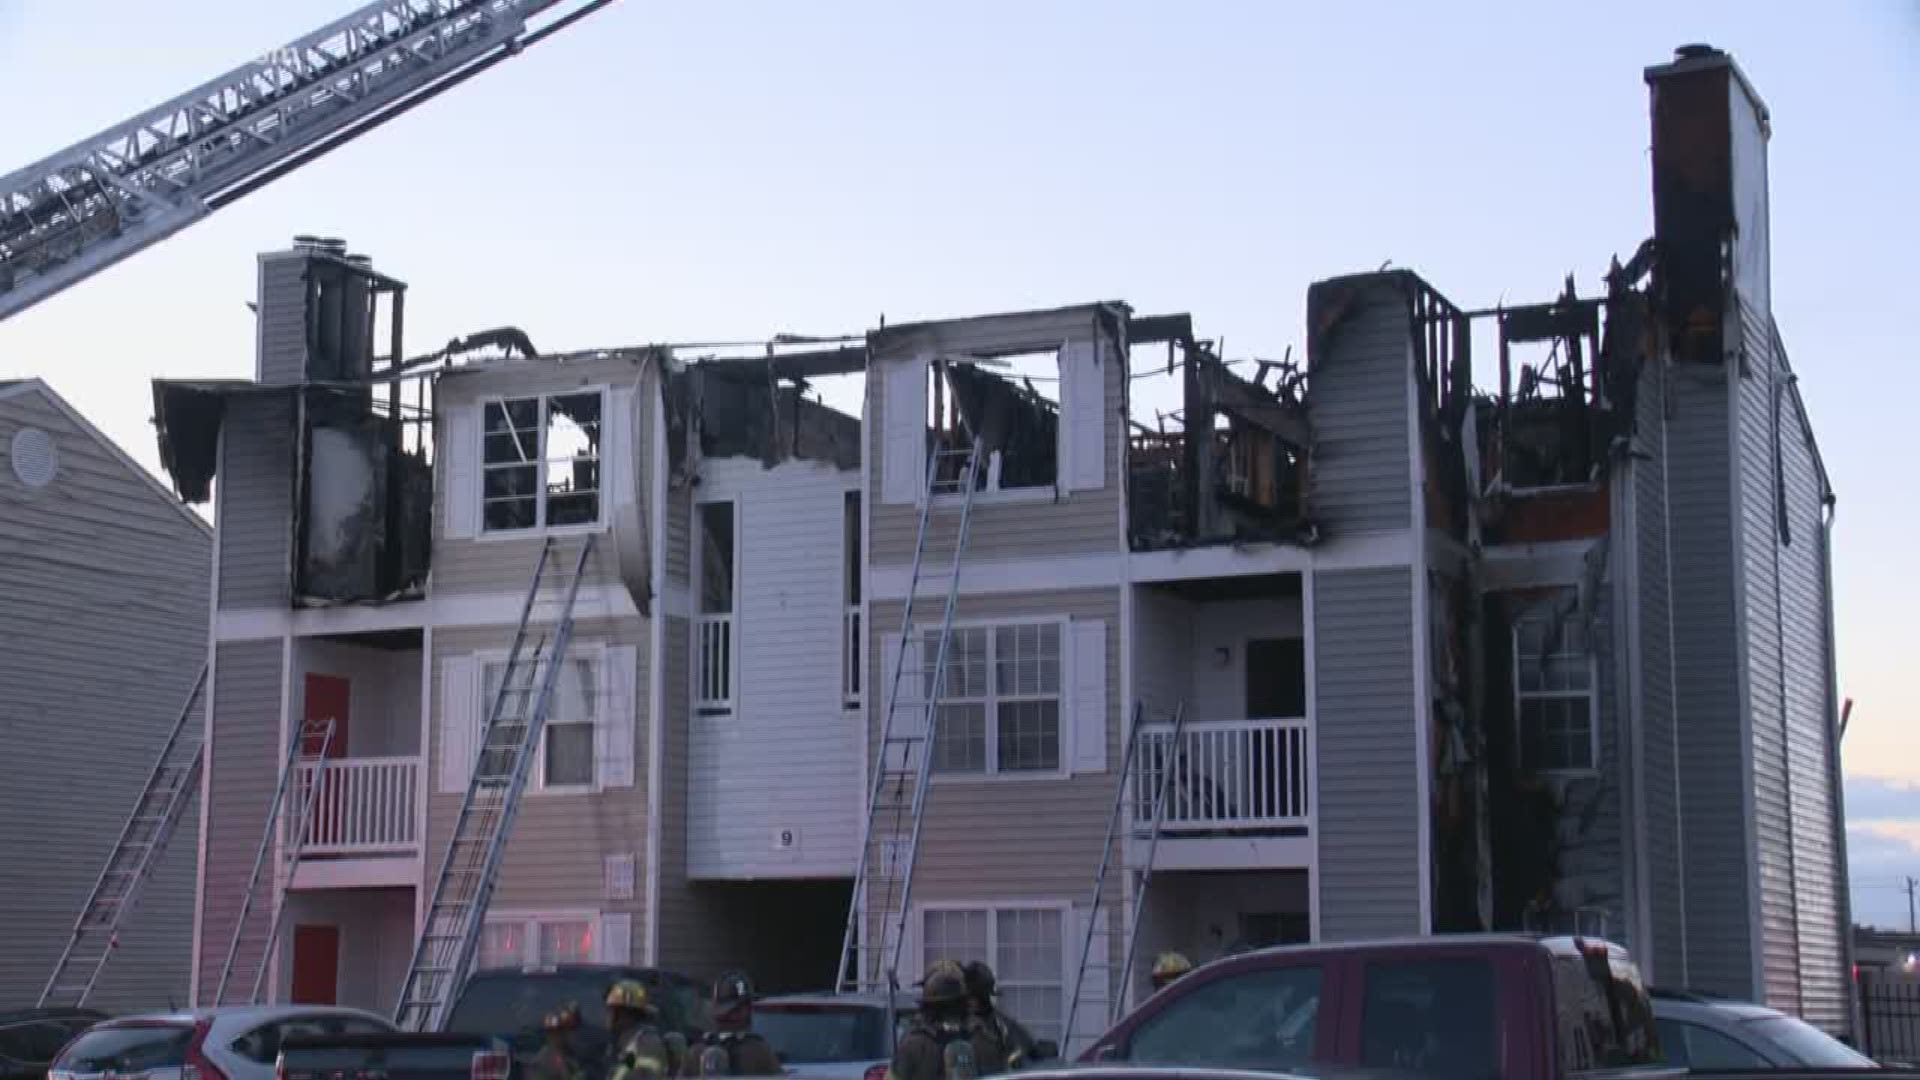 Firefighters battled a two-alarm condominium fire in the Hilltop section of Virginia Beach Wednesday morning.